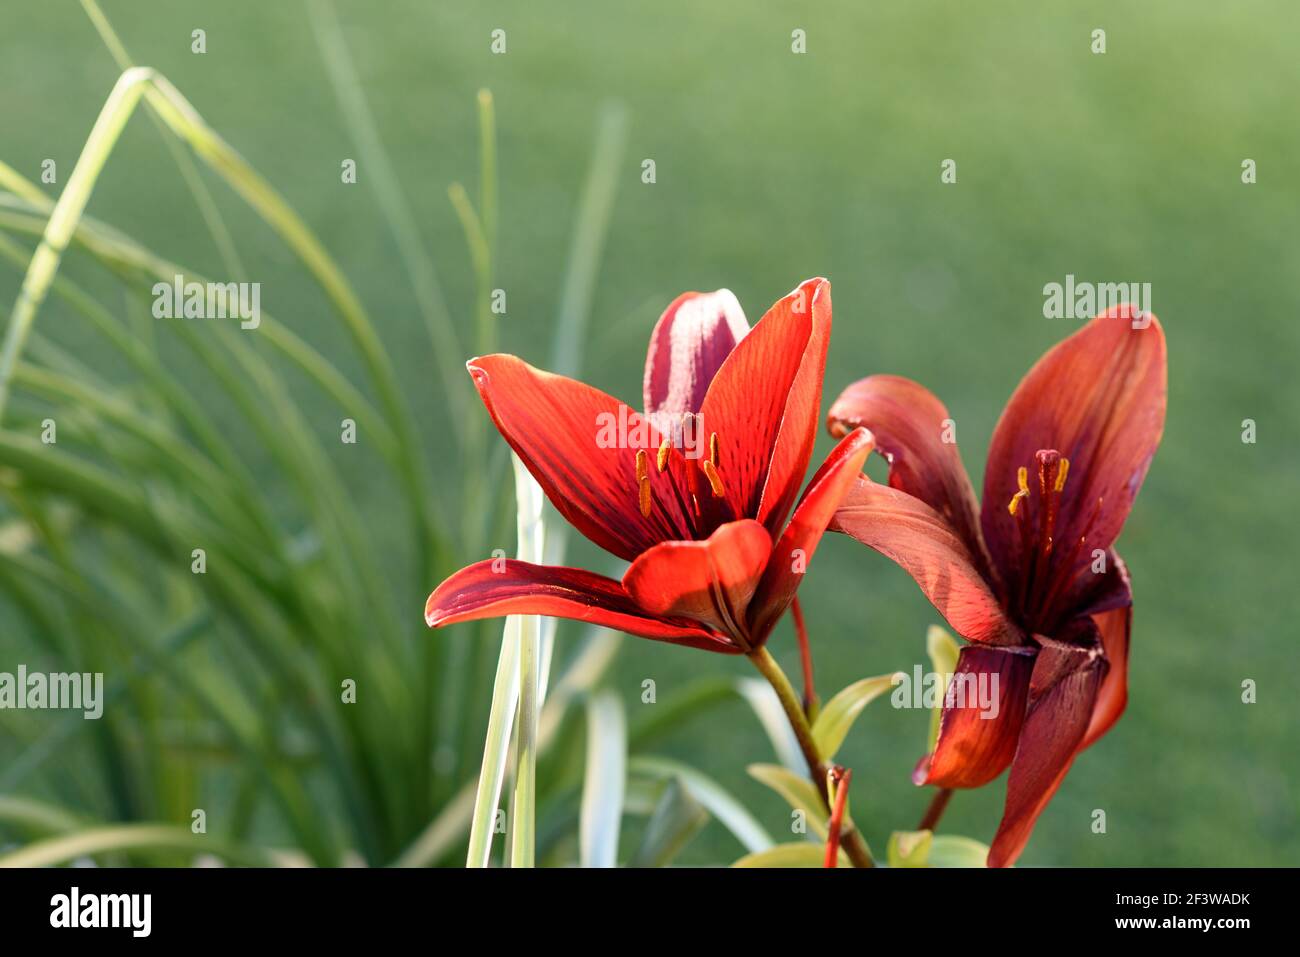 Flowers Background. Red lily flowers in garden. Stock Photo